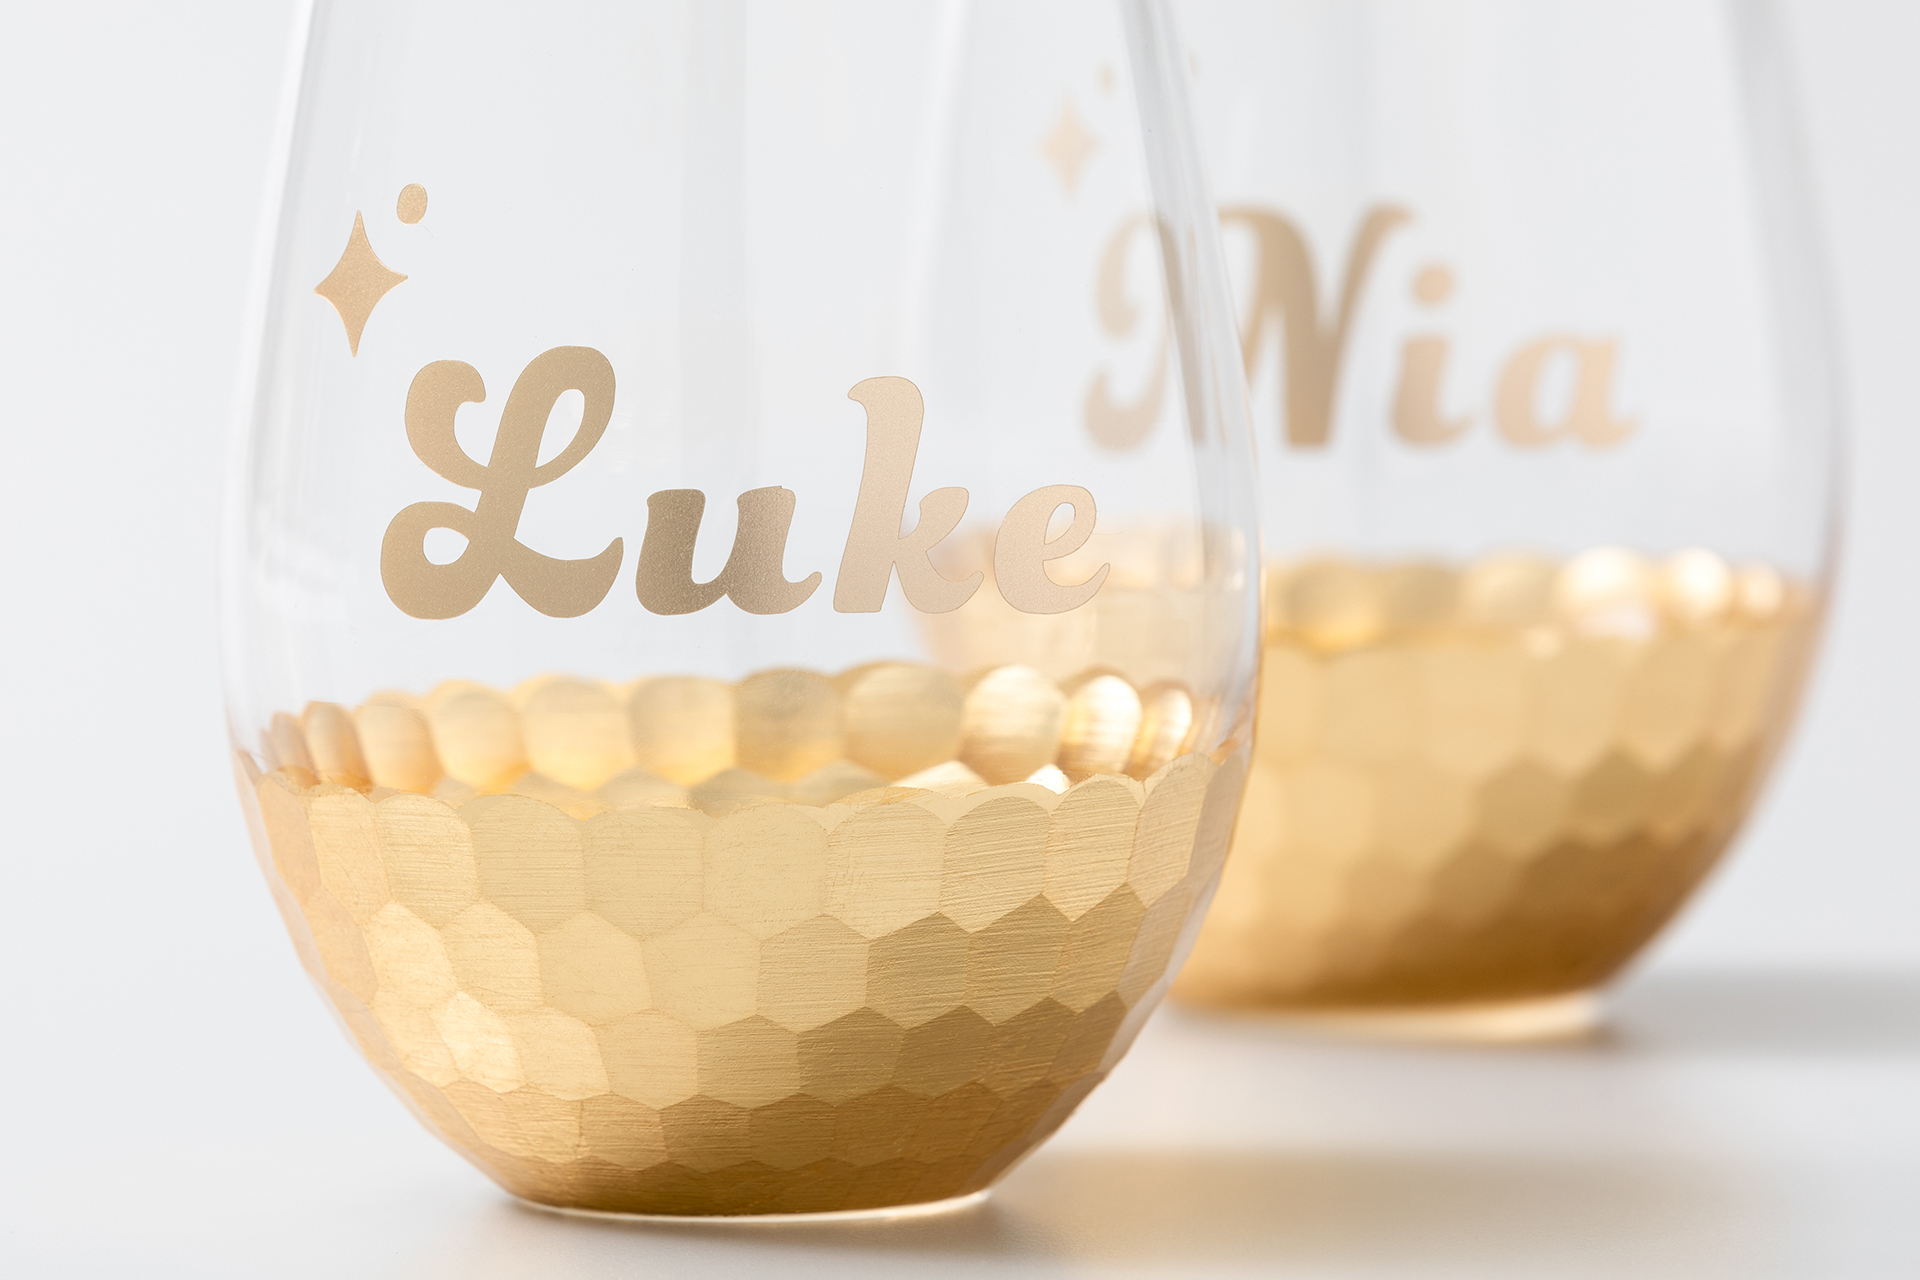 Wine glasses with gold on the bottom and names in gold vinyl